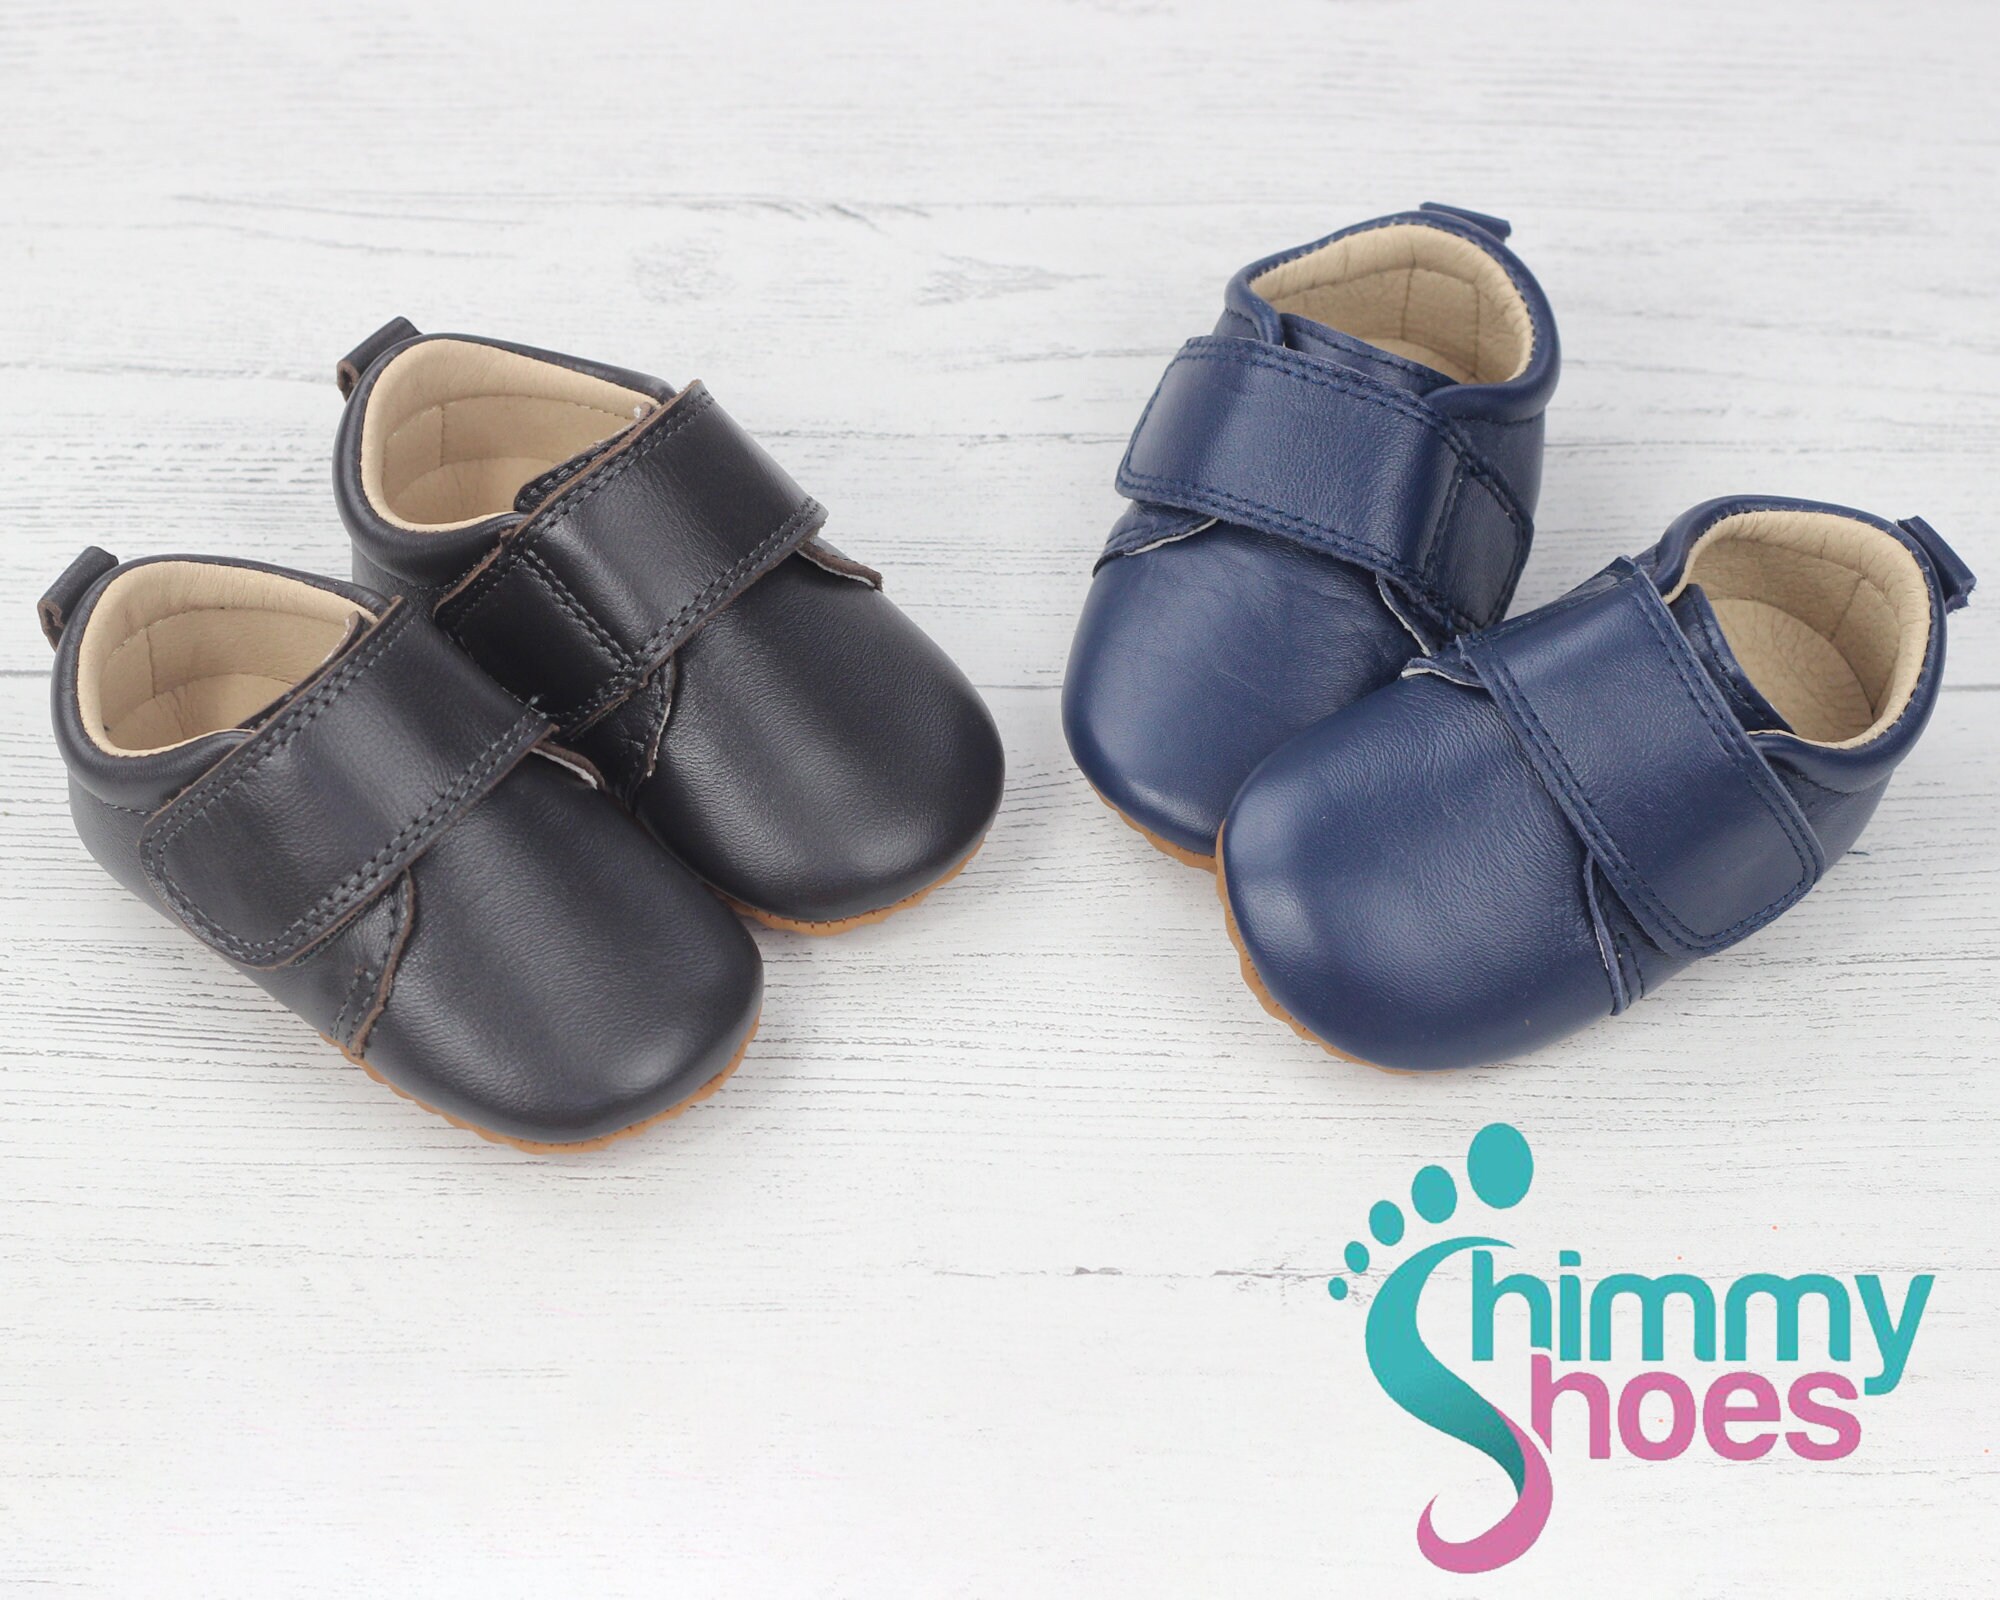 Real Leather Infant Shoes Baby Girl Leather Shoes Shoes for Special Occasions First Gift for Baby Girls Schoenen Meisjesschoenen Slofjes & Wiegschoentjes 